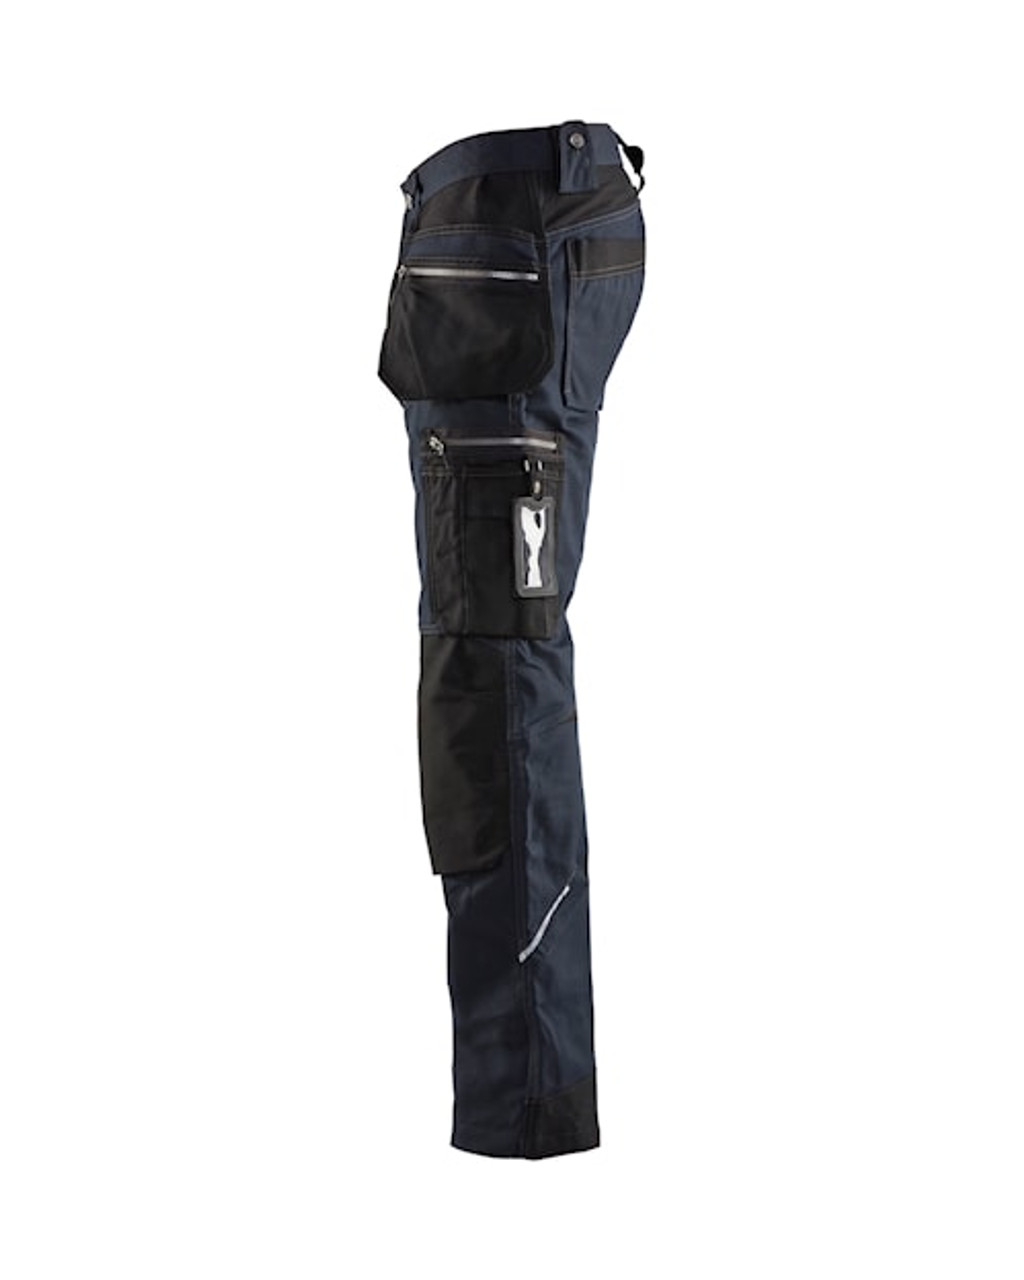 BLAKLADER Trousers | Canvas + Stretch Craftsman Trousers , Work Trousers with Holster Pockets with  for Electricians and Plumbers available in Melbourne